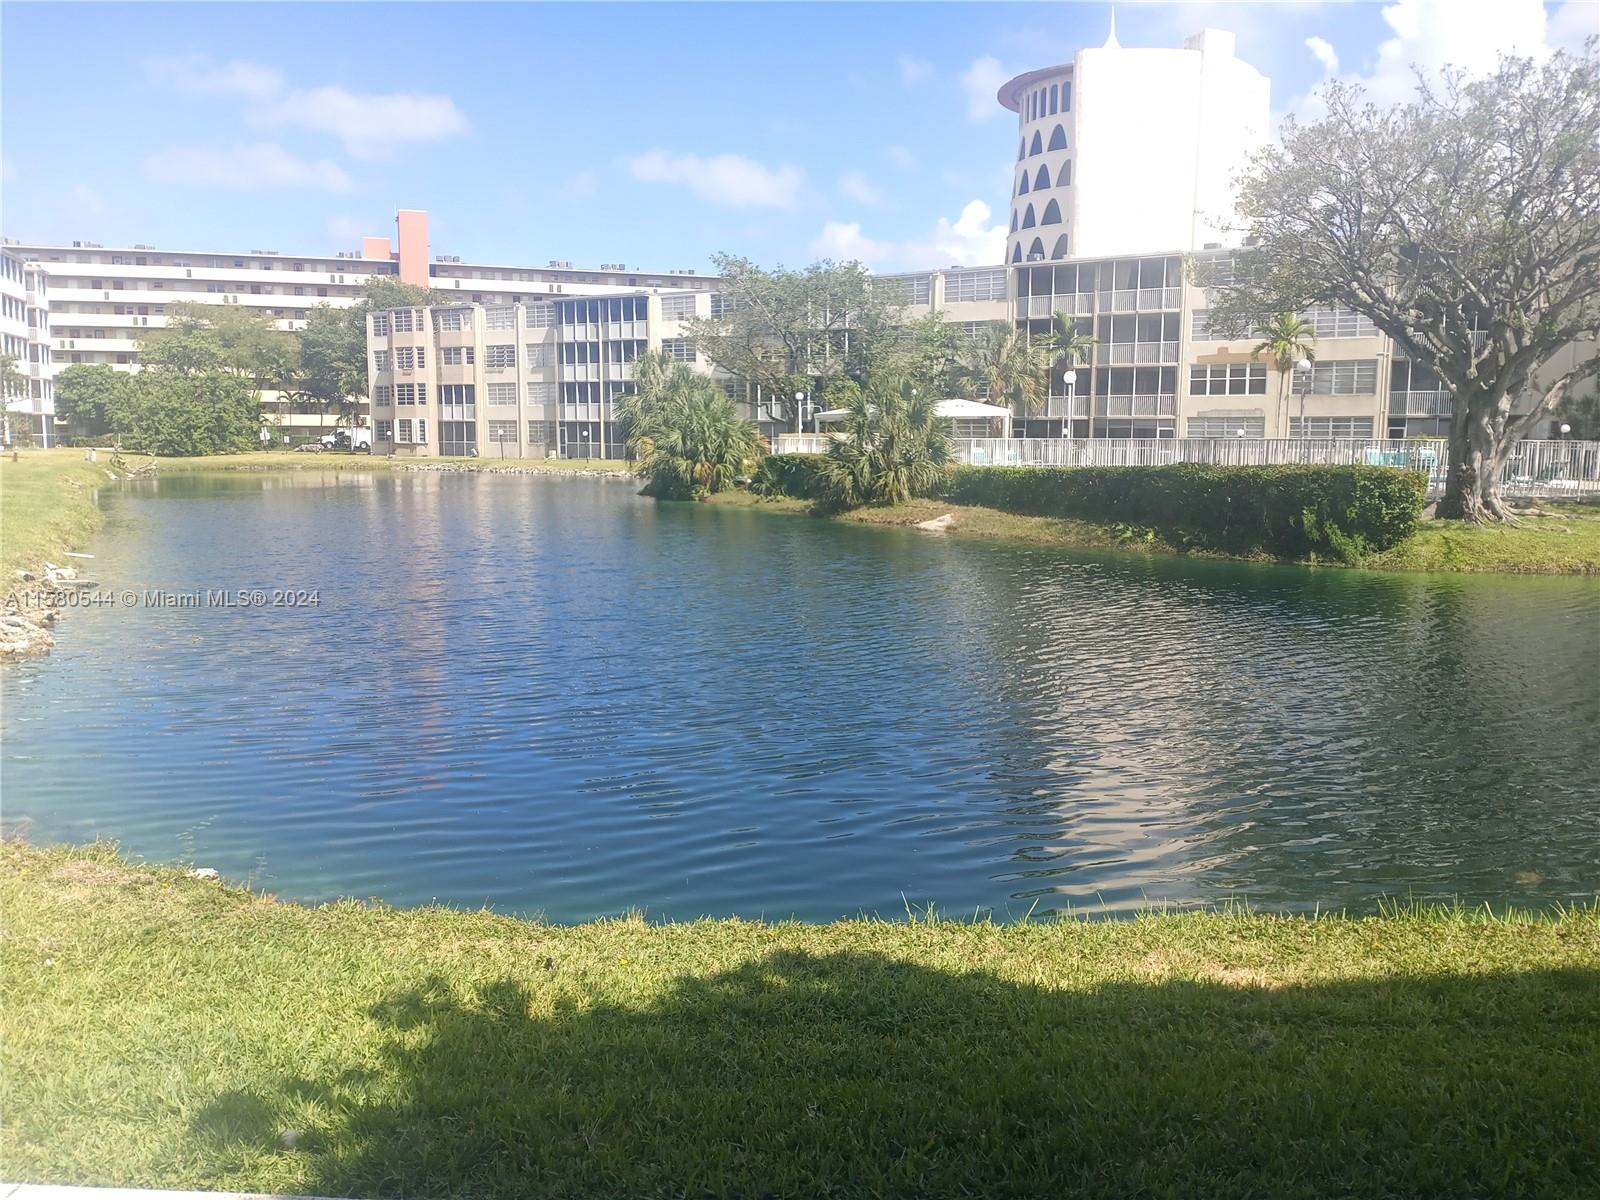 a view of a lake with tall building